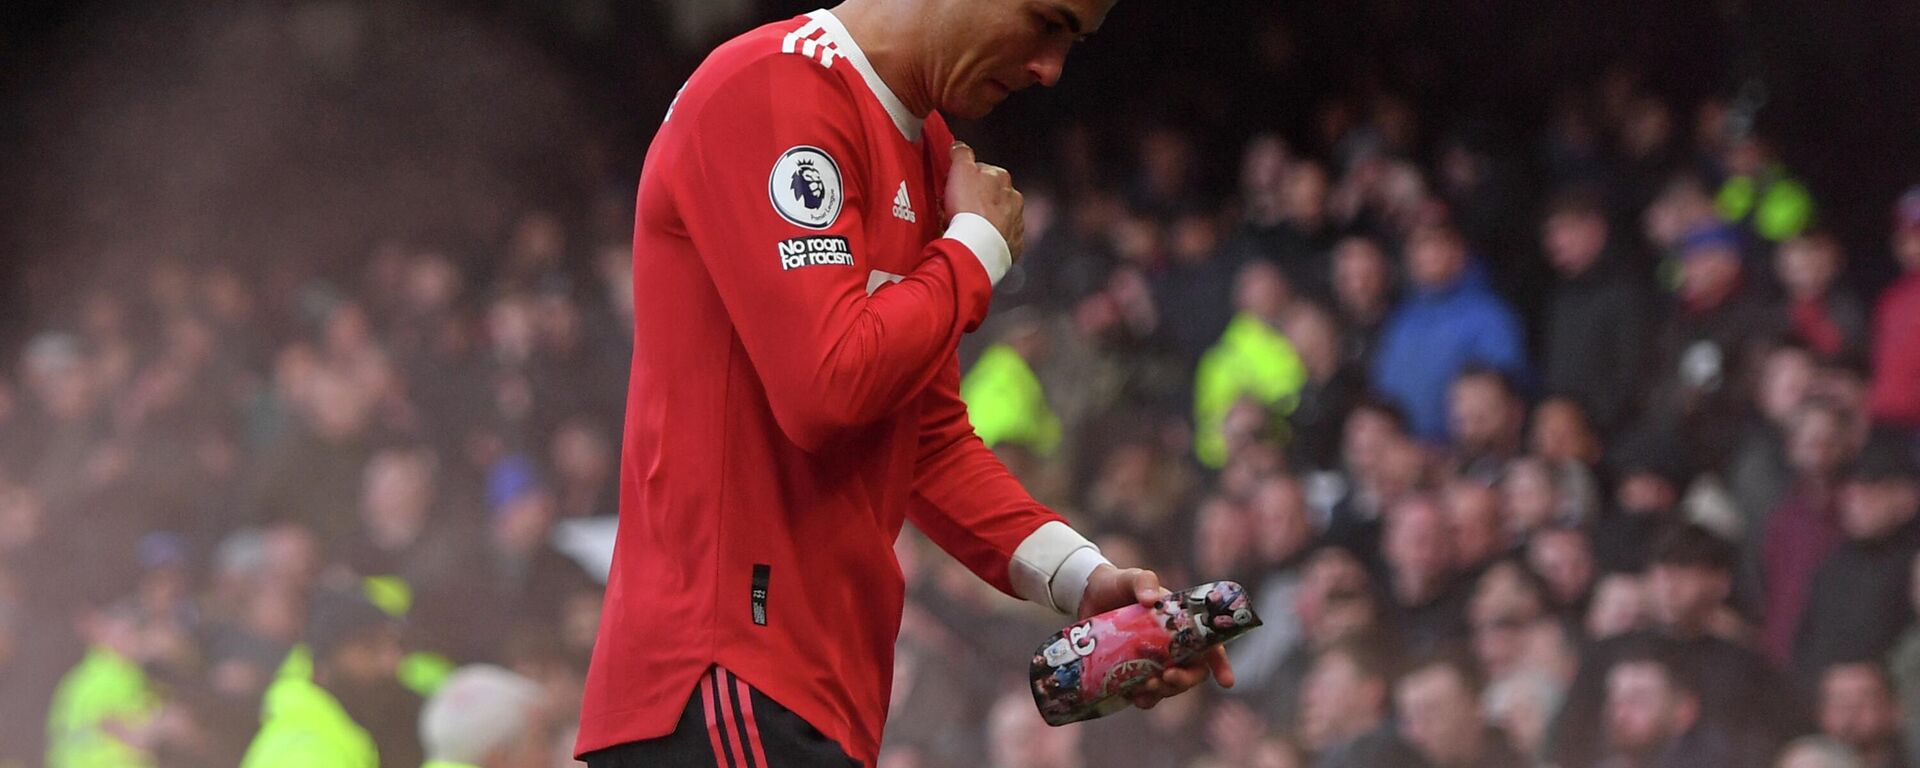 Manchester United's Portuguese striker Cristiano Ronaldo reacts to their defeat as he leaves after the English Premier League football match between Everton and Manchester United at Goodison Park in Liverpool, north west England on April 9, 2022. - Sputnik International, 1920, 01.05.2022